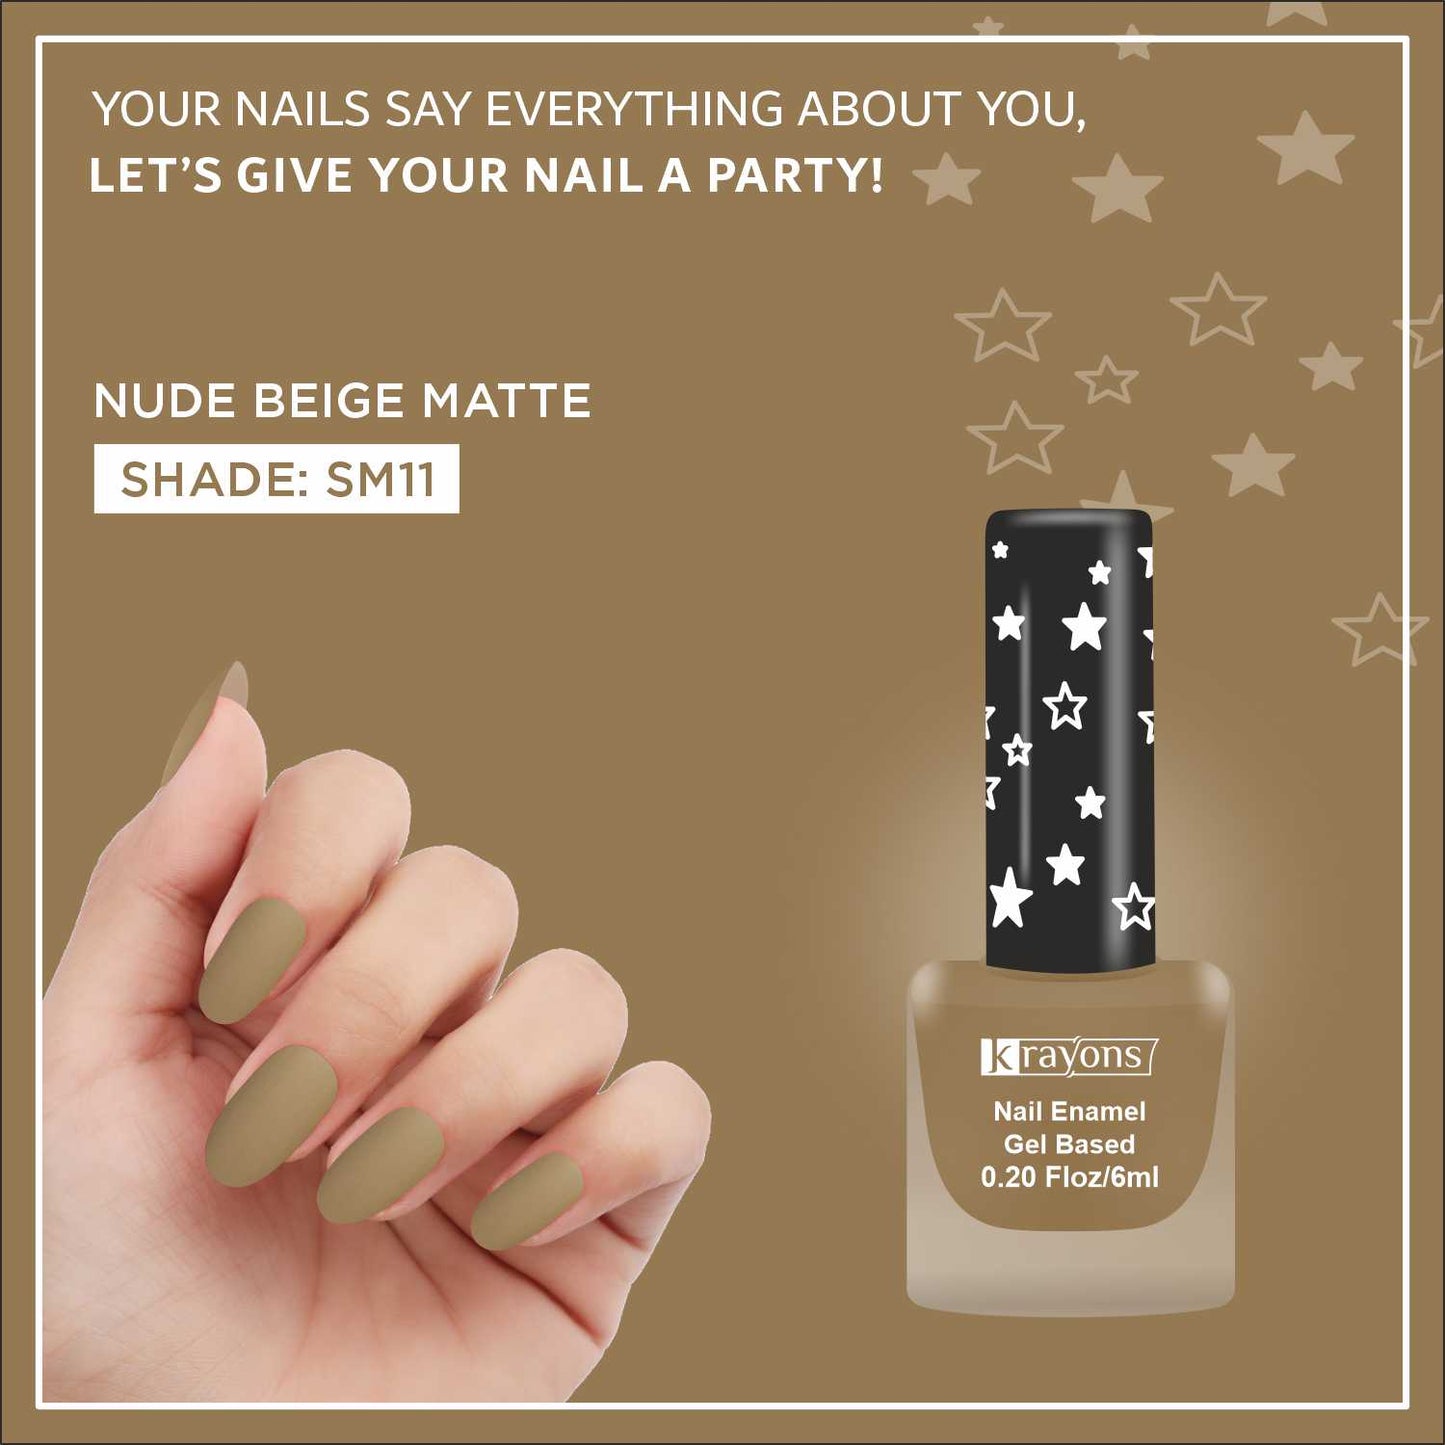 Krayons Cute Super Matte Finish Nail Enamel, Quick Dry, Smooth Finish, LongLasting, Nude Beige, 6ml